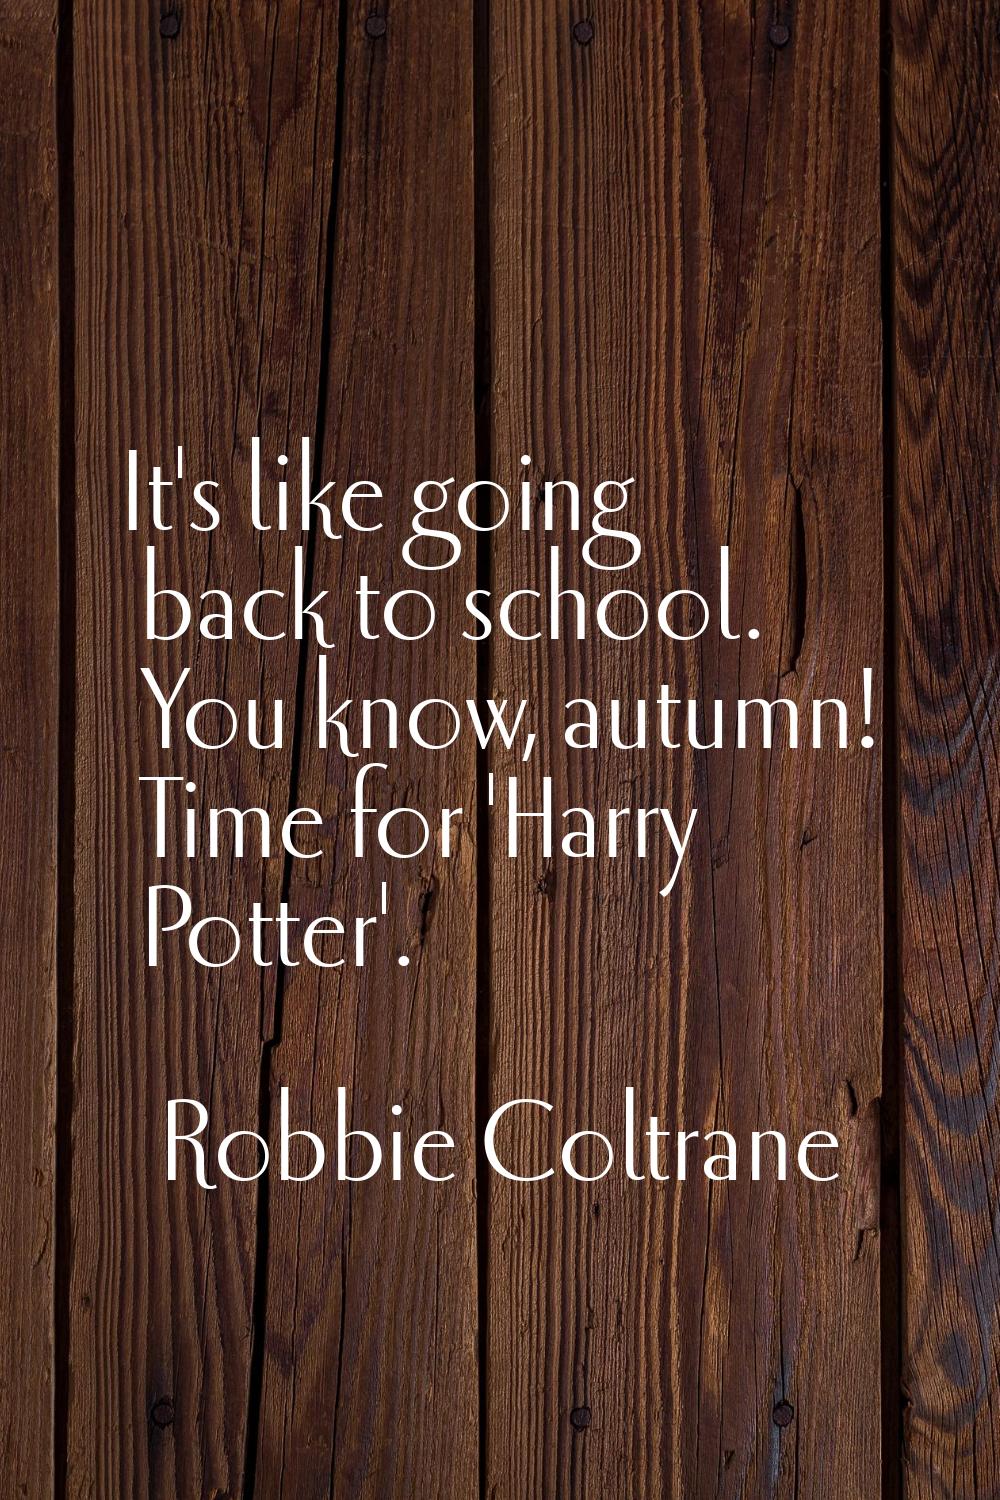 It's like going back to school. You know, autumn! Time for 'Harry Potter'.